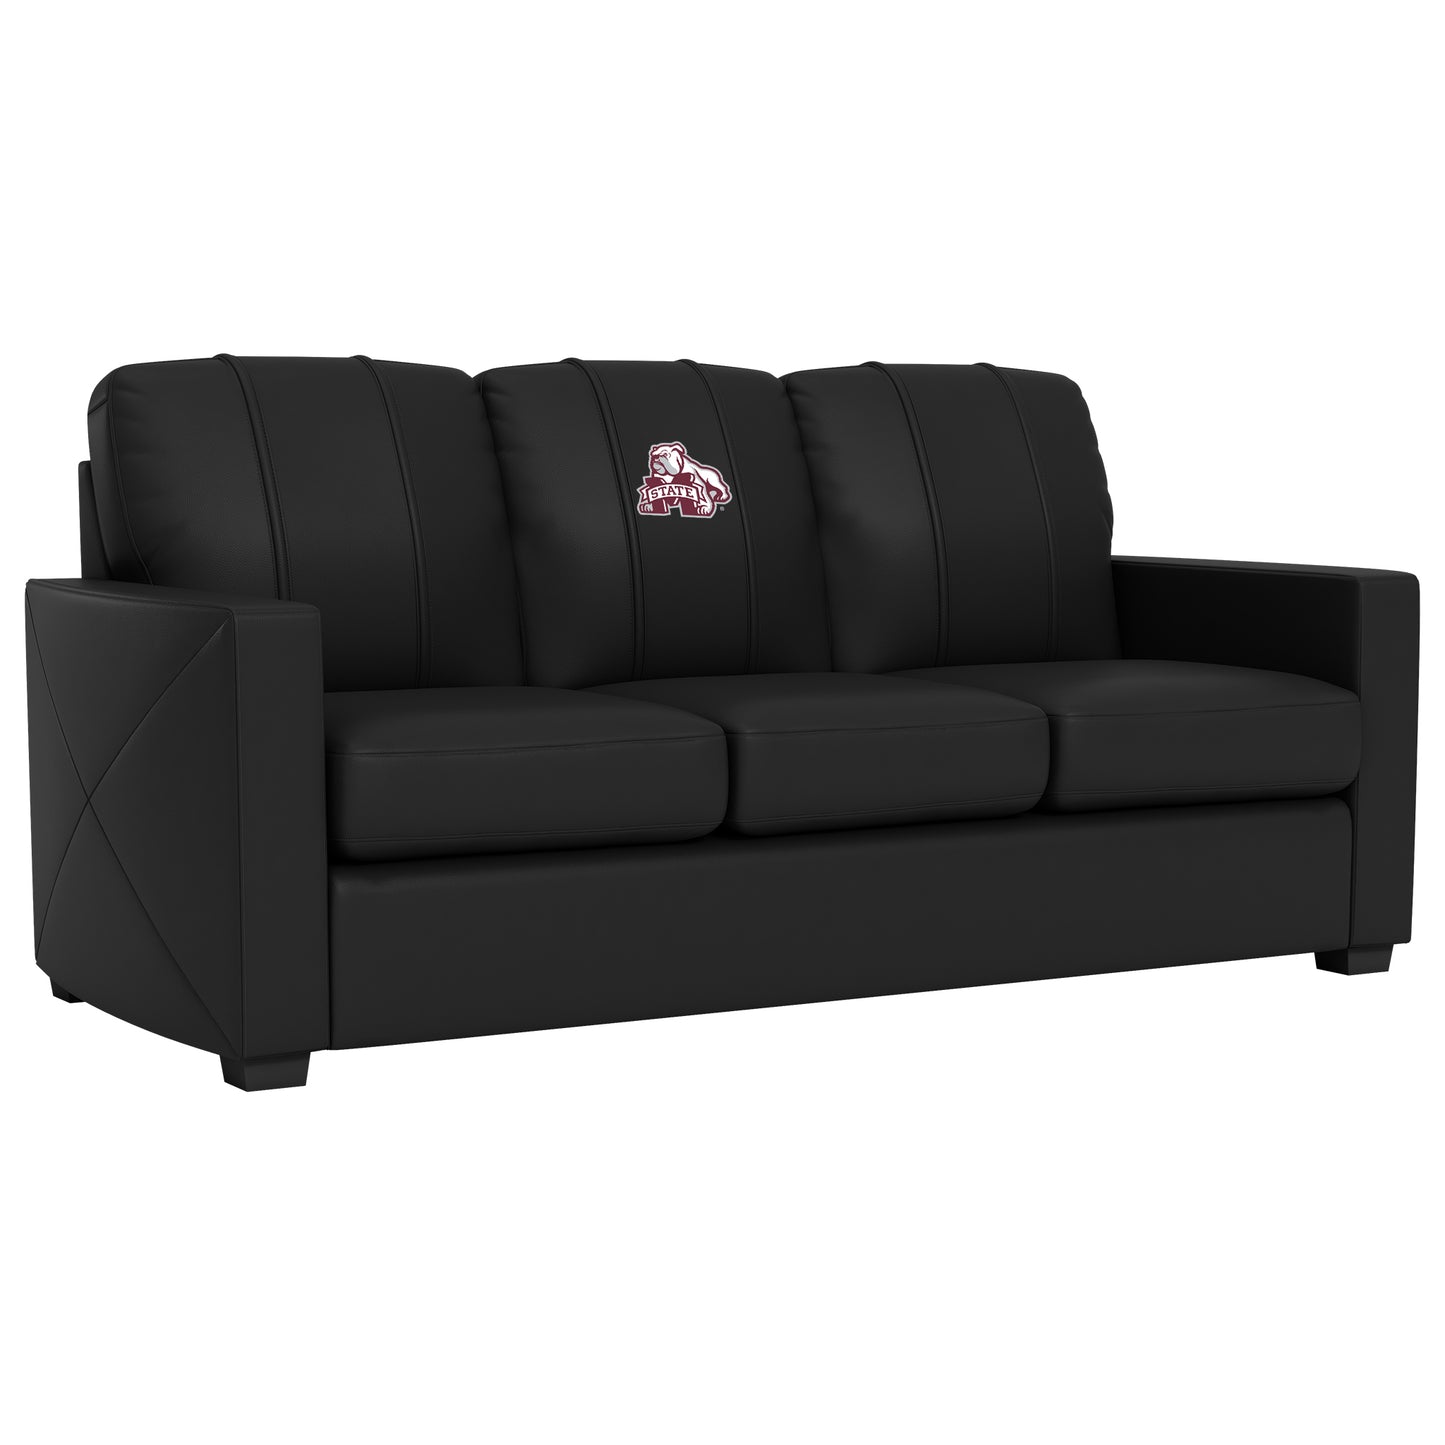 Silver Sofa with Mississippi State Secondary